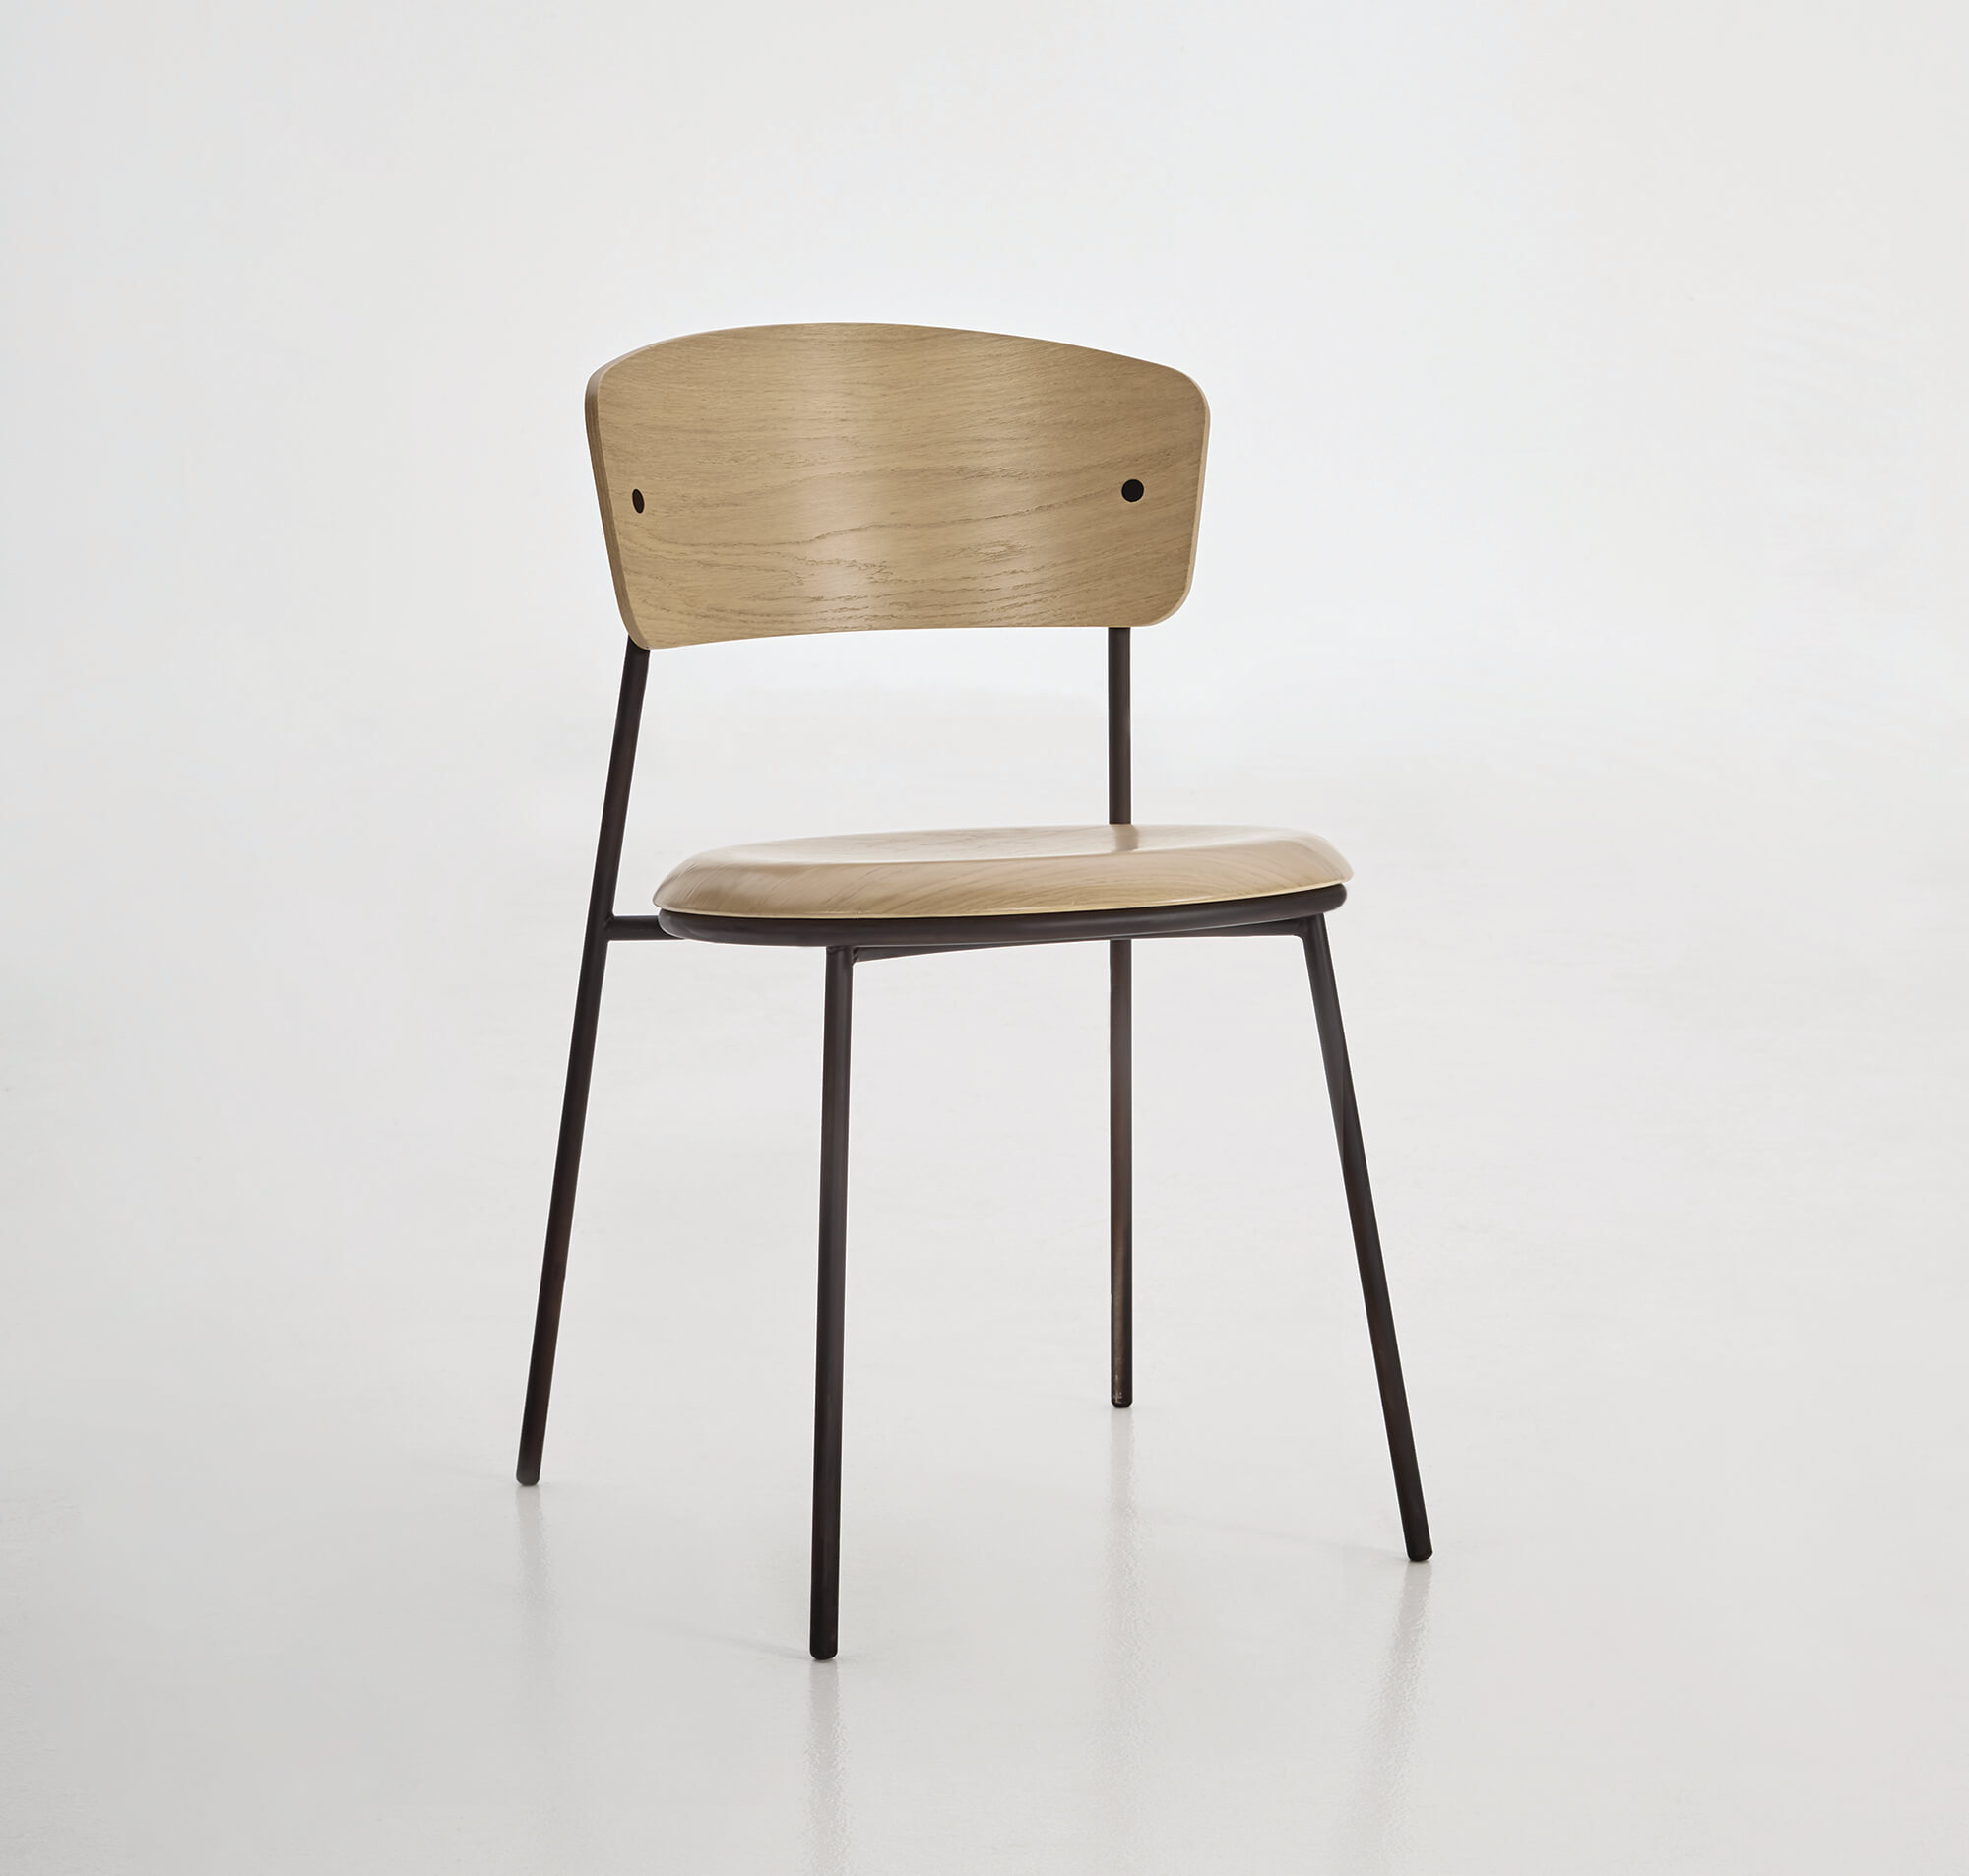 a light-colored wooden chair with rounded edges